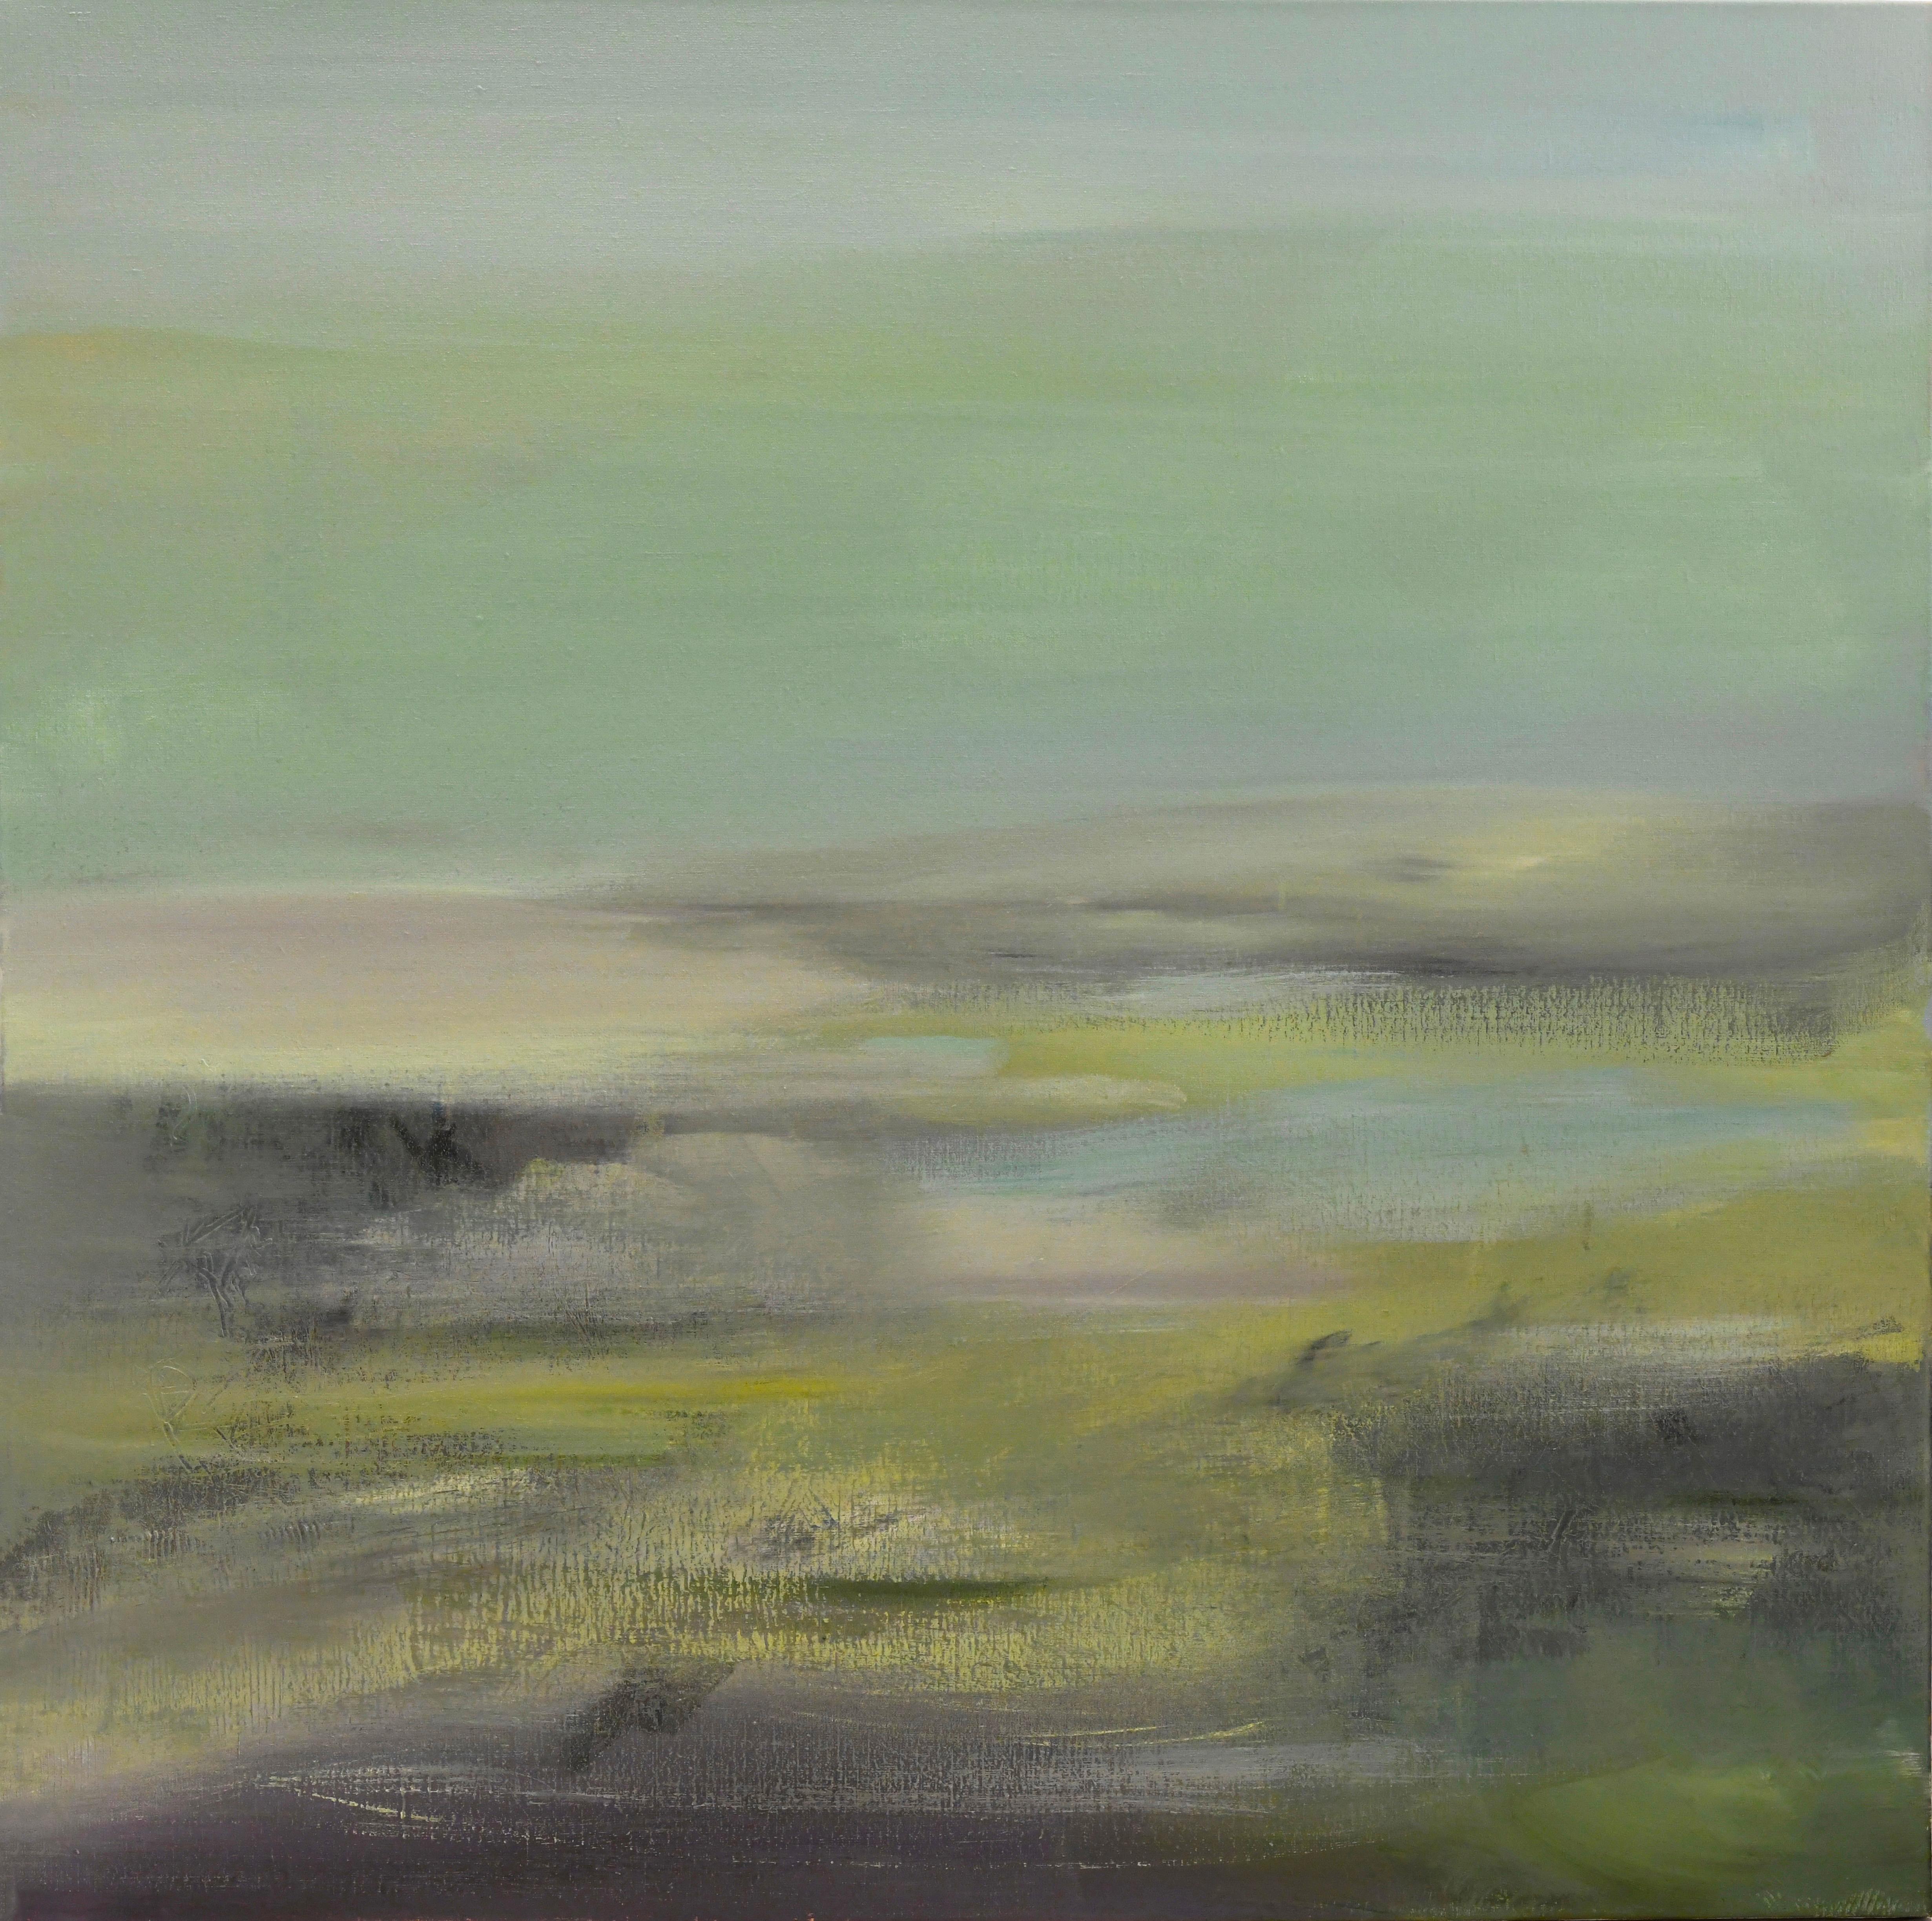 Walther’s layered abstracts explore how we balance our connection to the digital world with our connection to our inner selves and to nature. Her work is intended to take us on contemplative journeys of sorts by highlighting these realms.

The